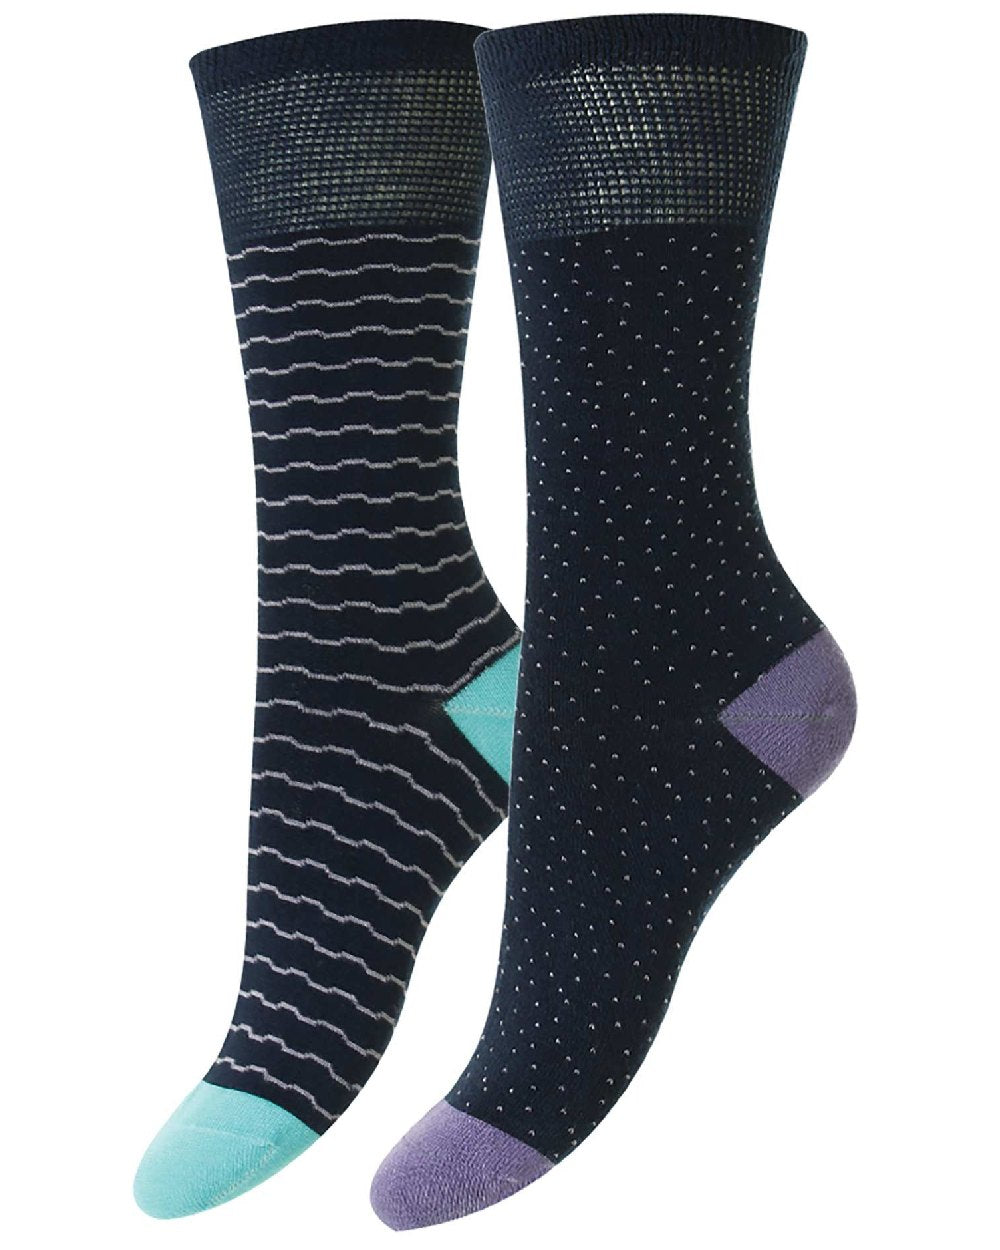 HJ Hall Daisy/Stripe Bamboo Comfort Top Socks | Twin Pack in Navy 